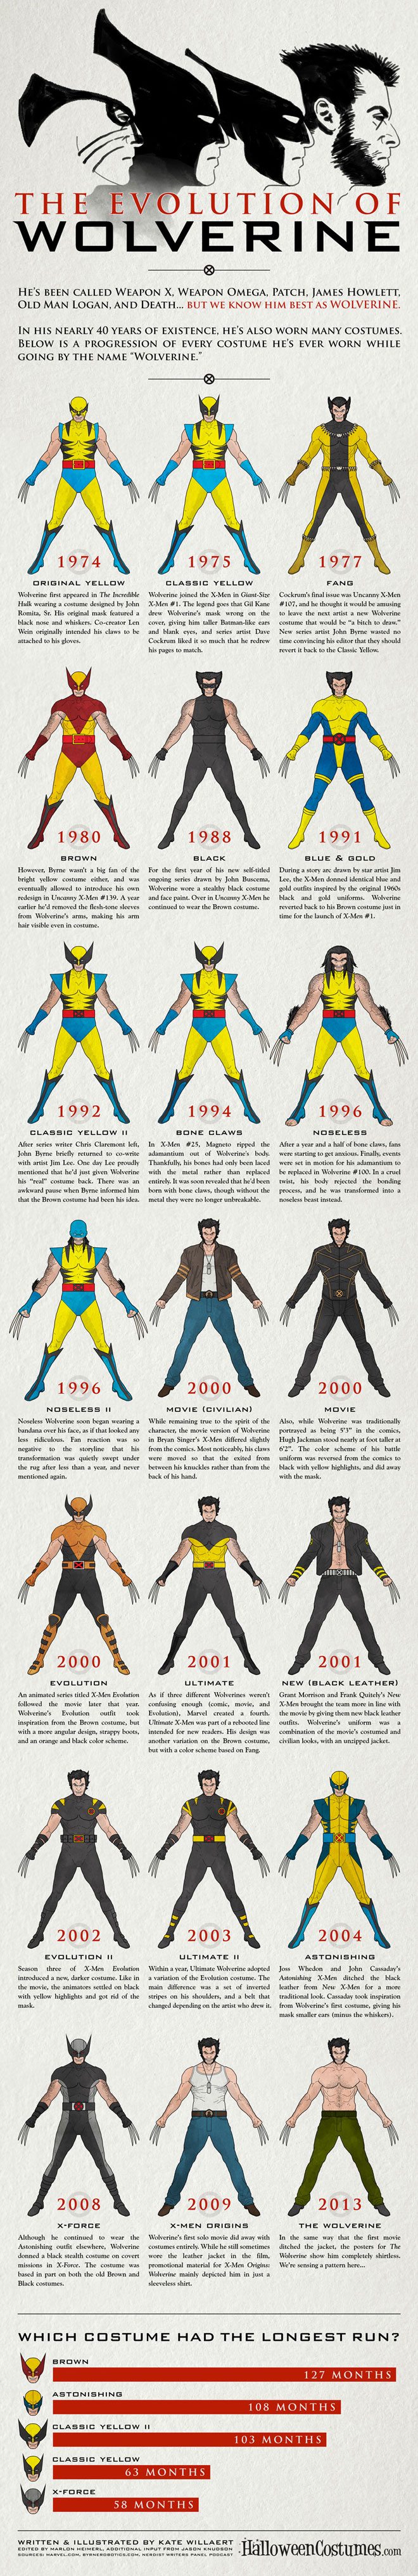 The Evolution of Wolverine's Costume Infographic